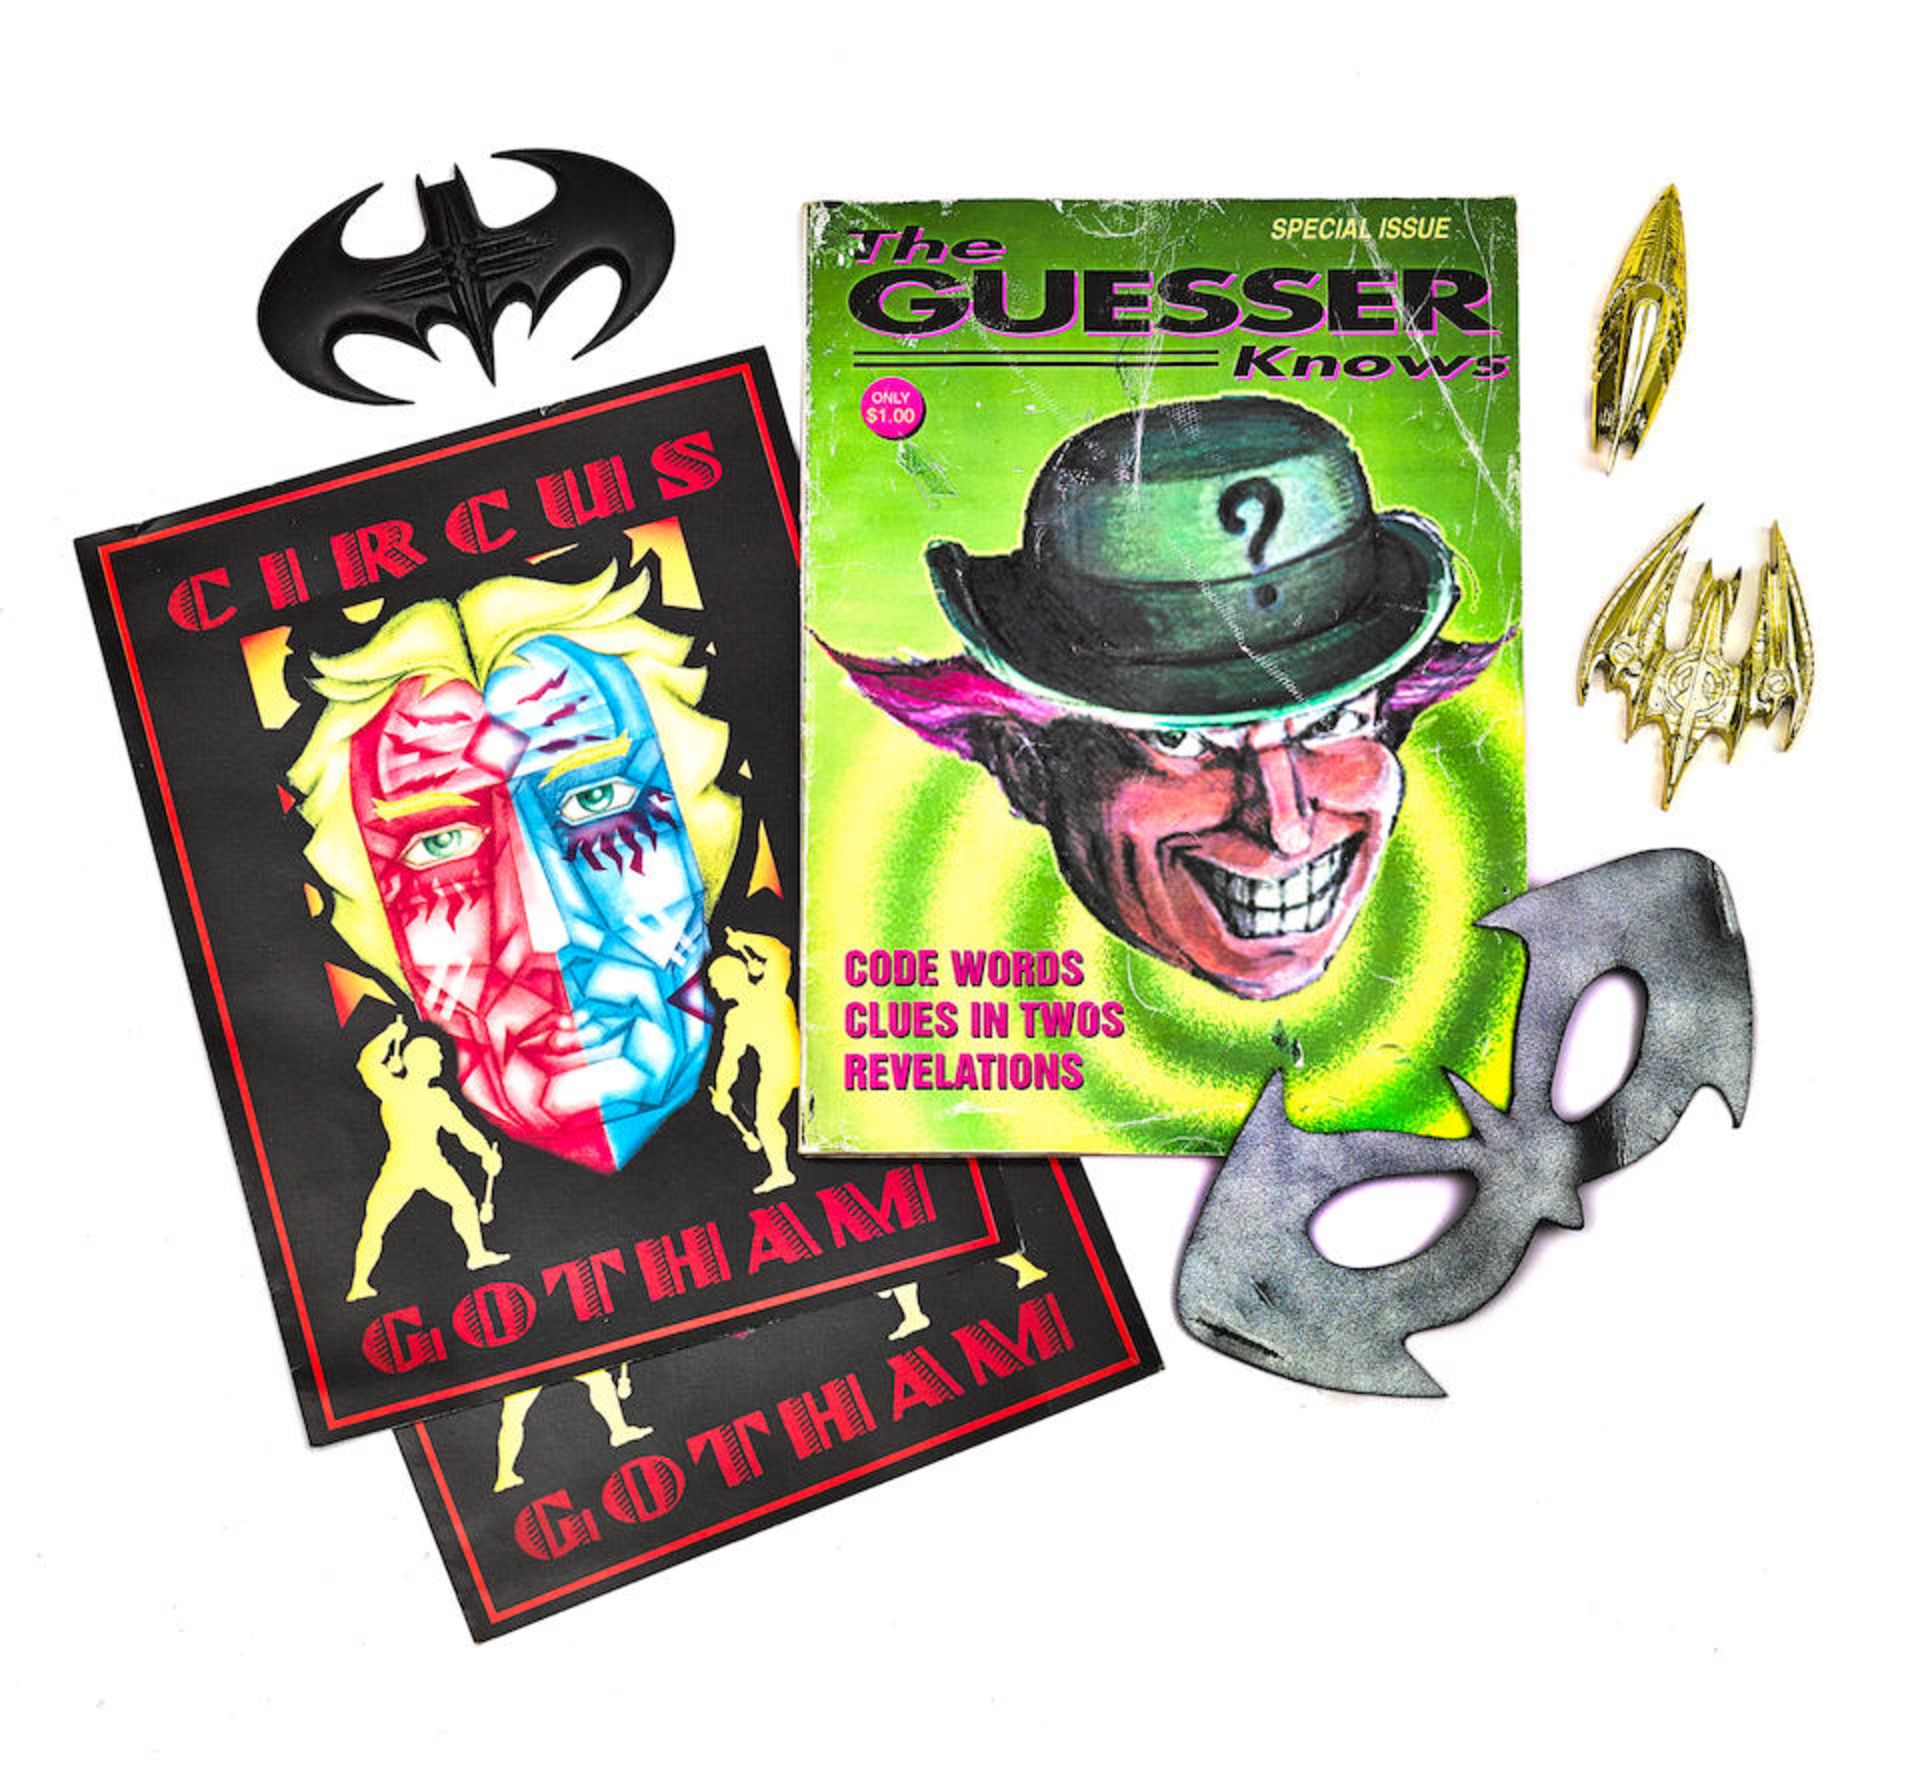 A GROUP OF BATMAN FOREVER AND BATMAN AND ROBIN PROP PUBLICATIONS AND OTHER MEMORABILIA